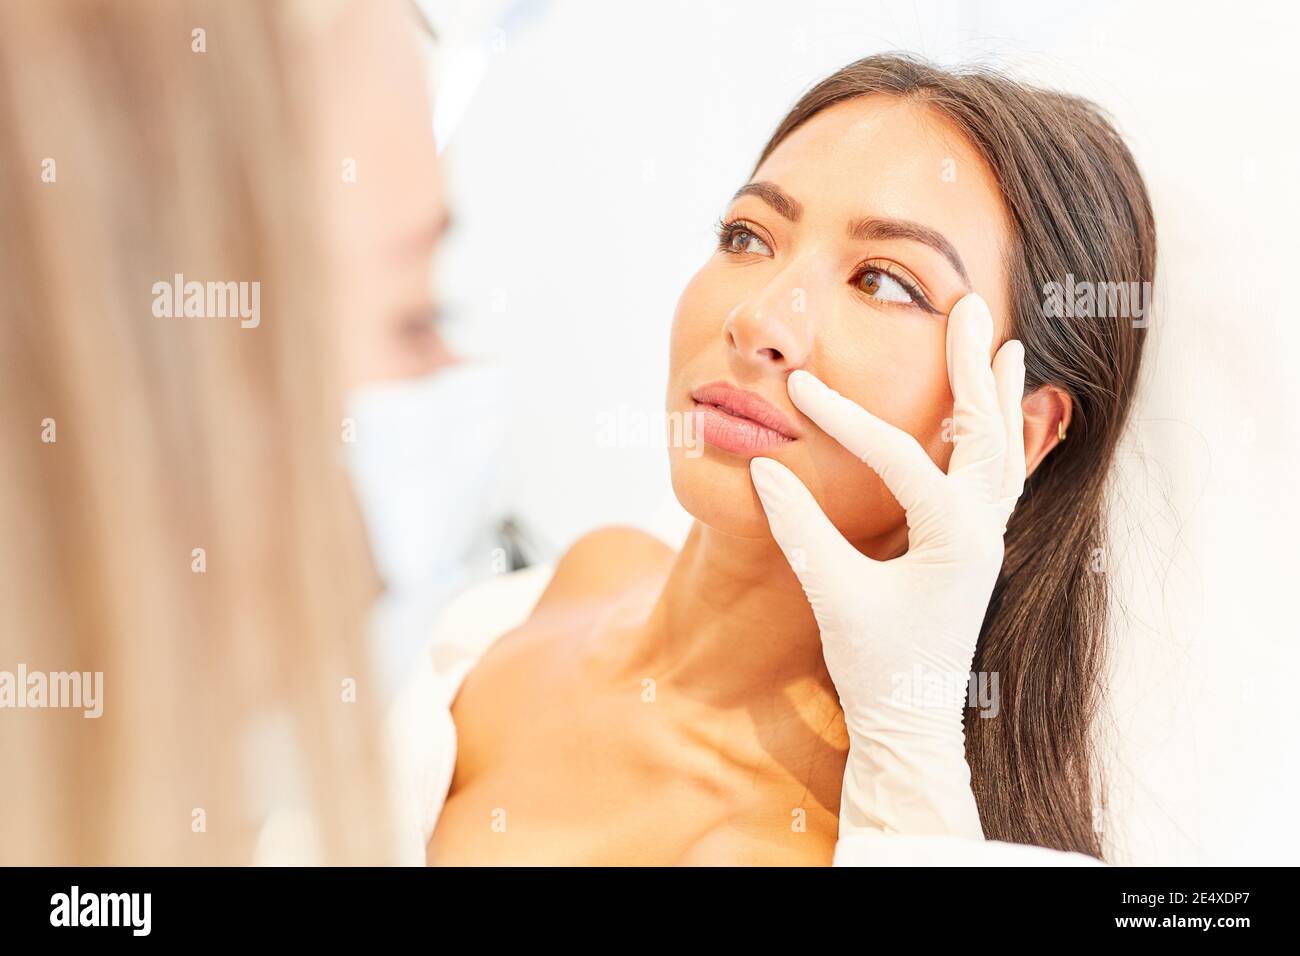 Young woman as a patient in consultation about a facelift or cosmetic surgery Stock Photo